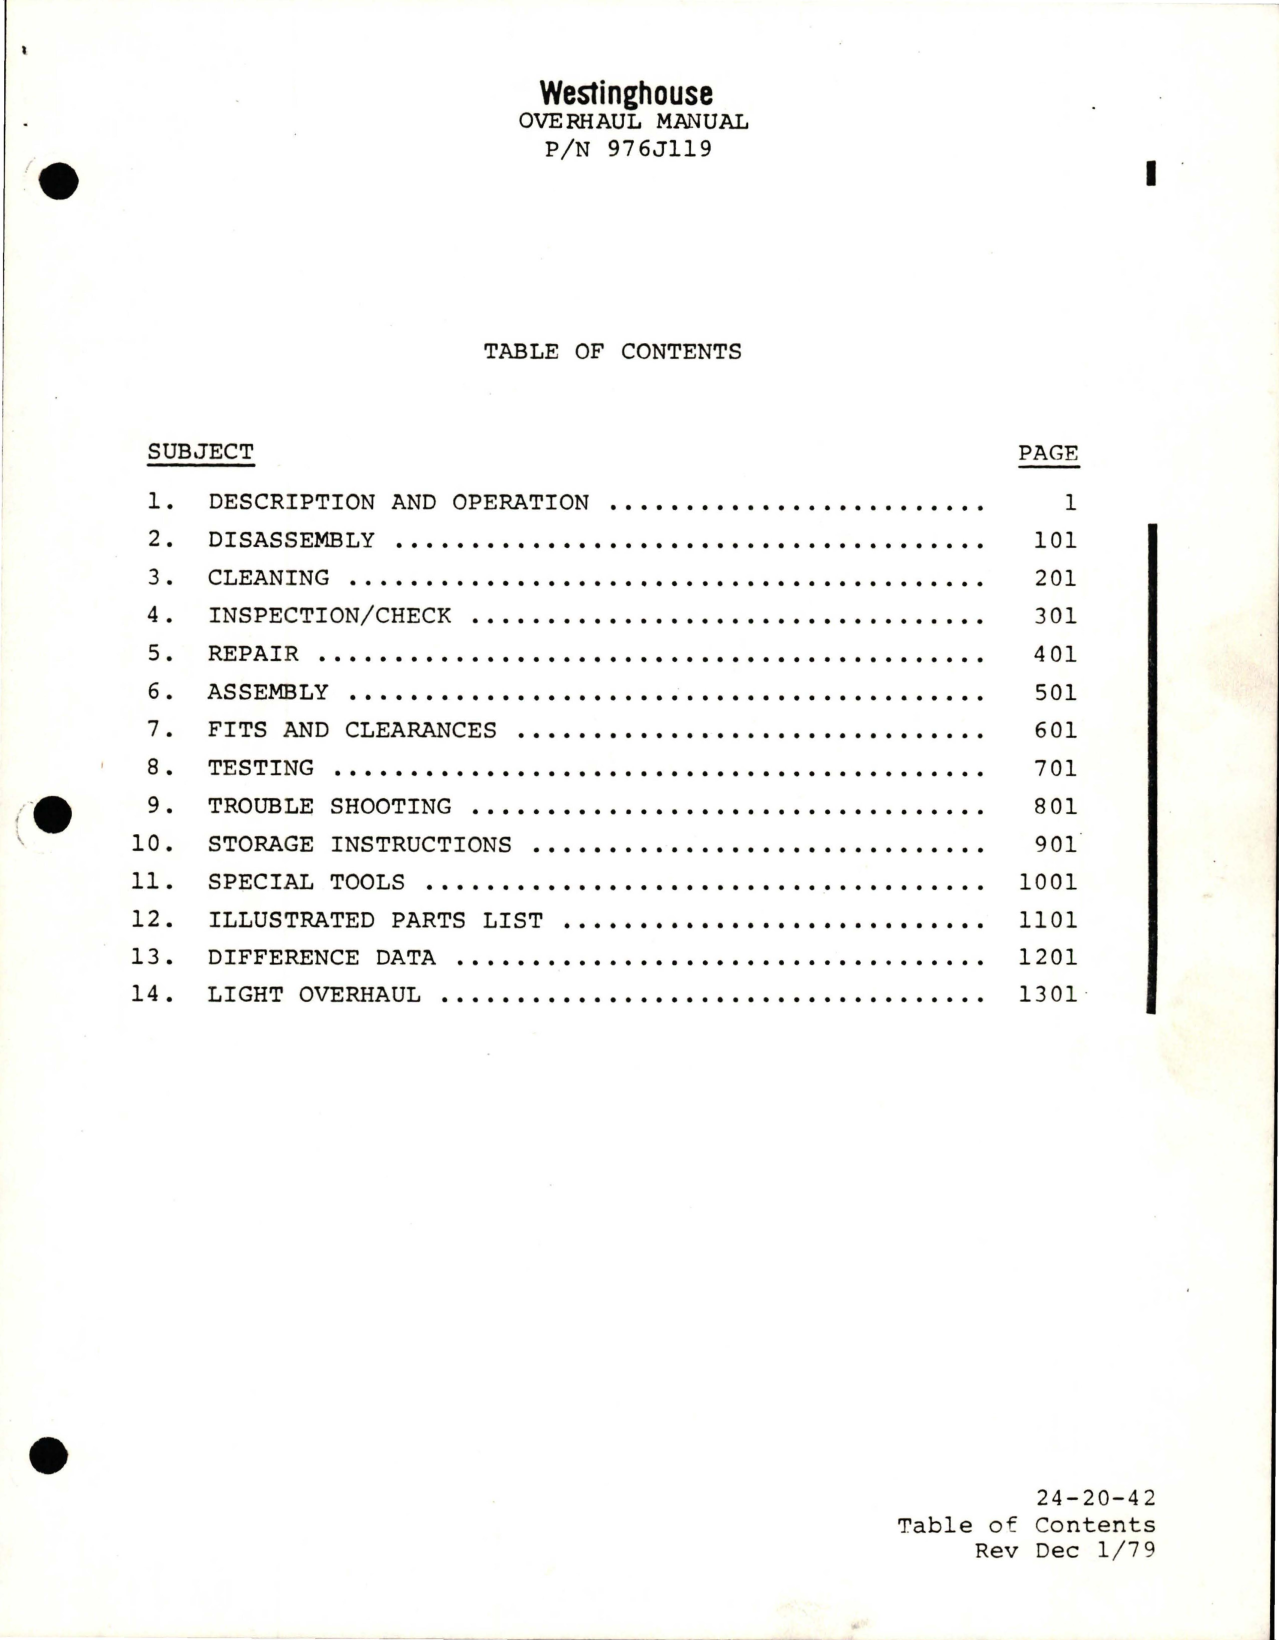 Sample page 9 from AirCorps Library document: Overhaul Manual for AC Generator 